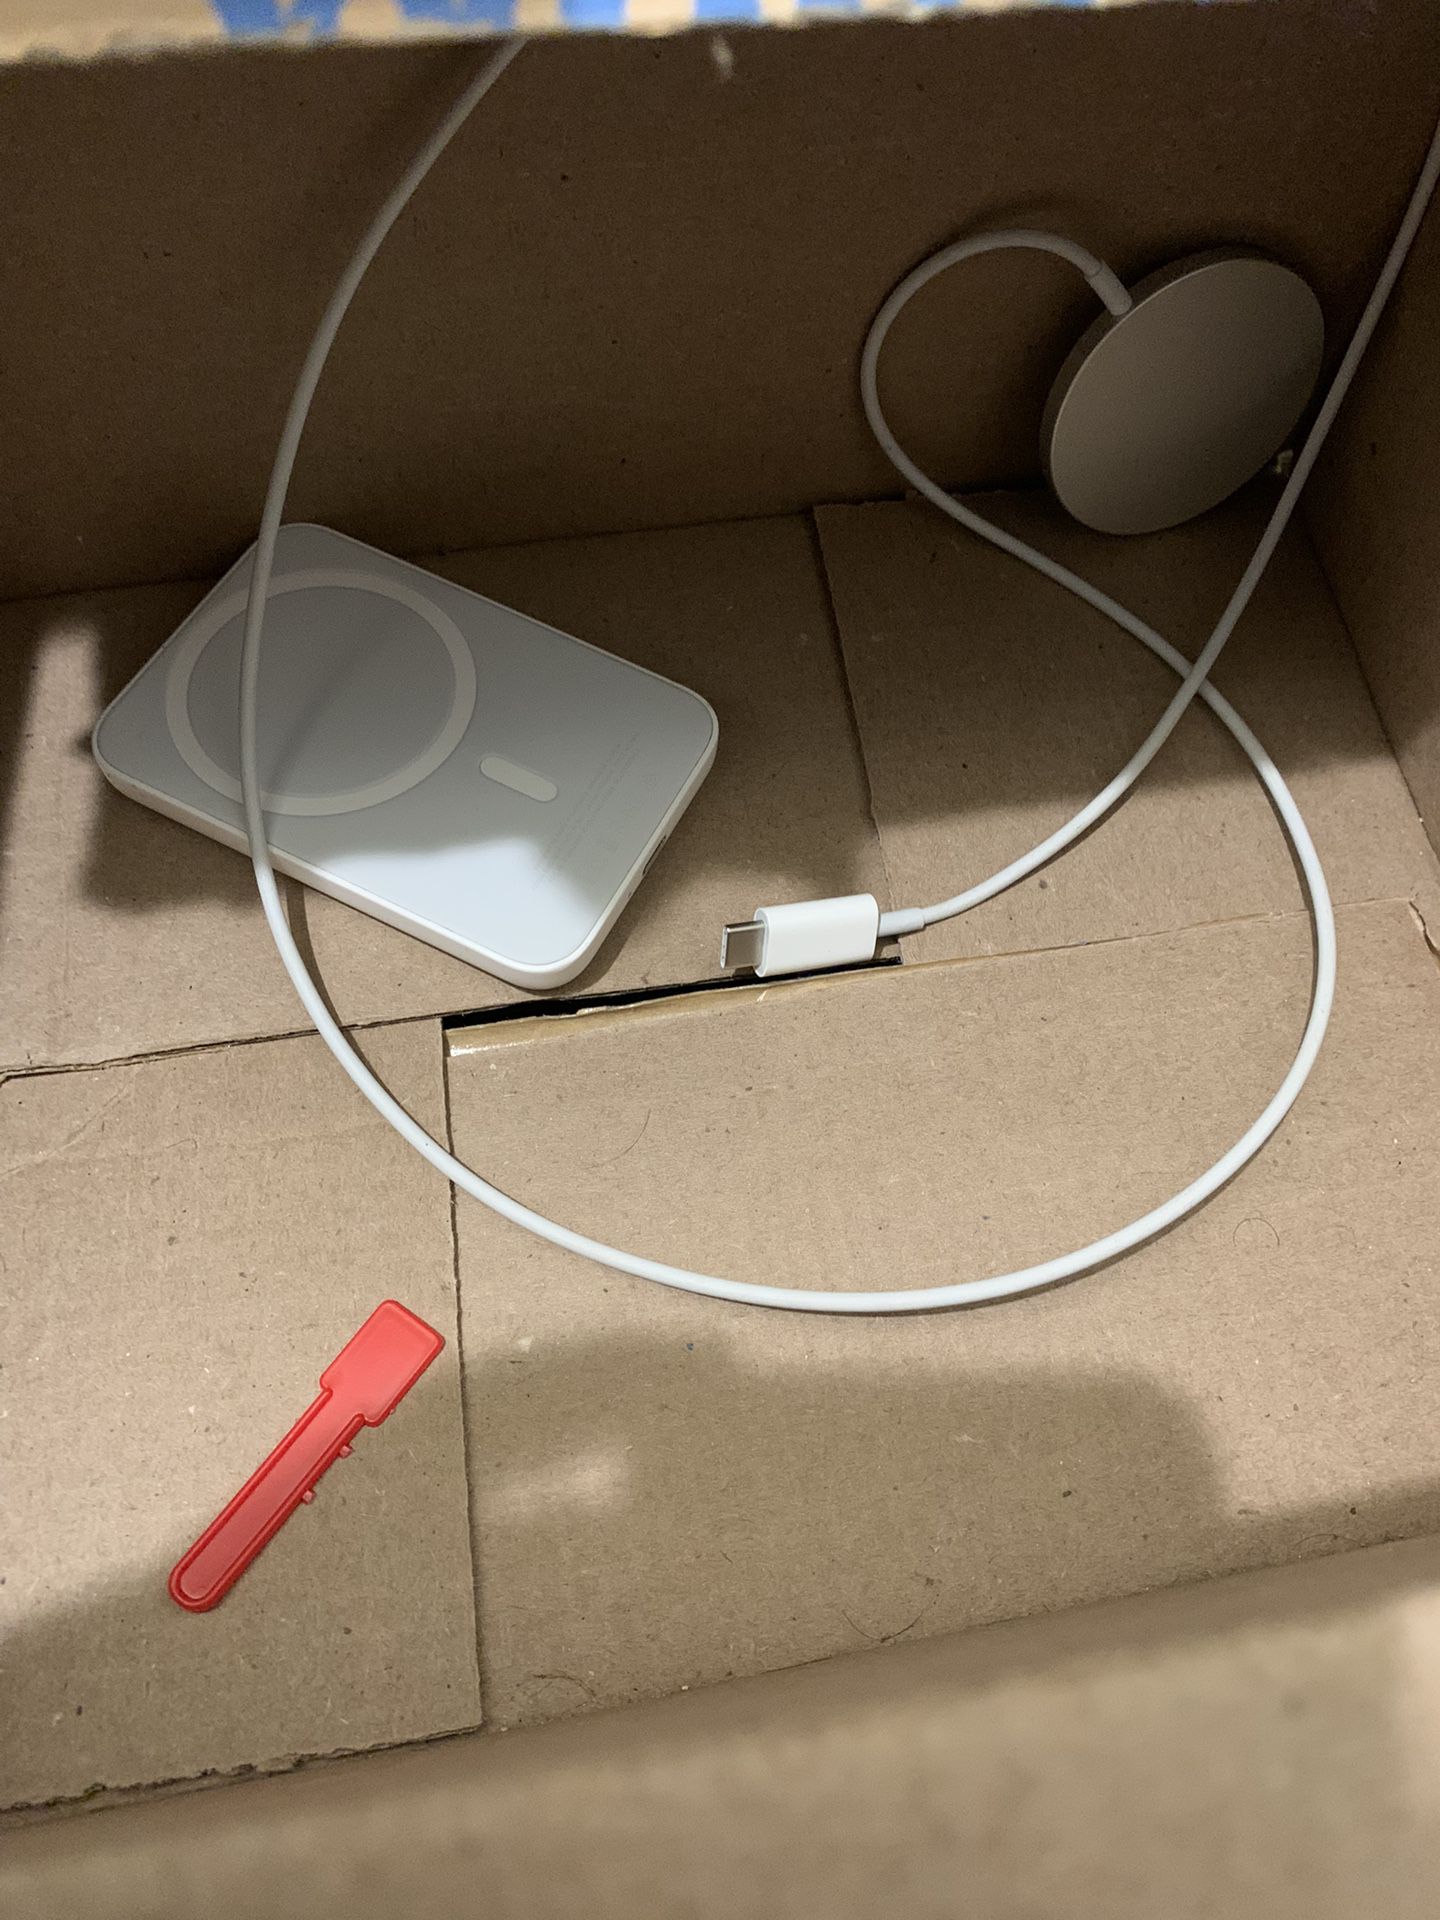 Apple Magsafe products